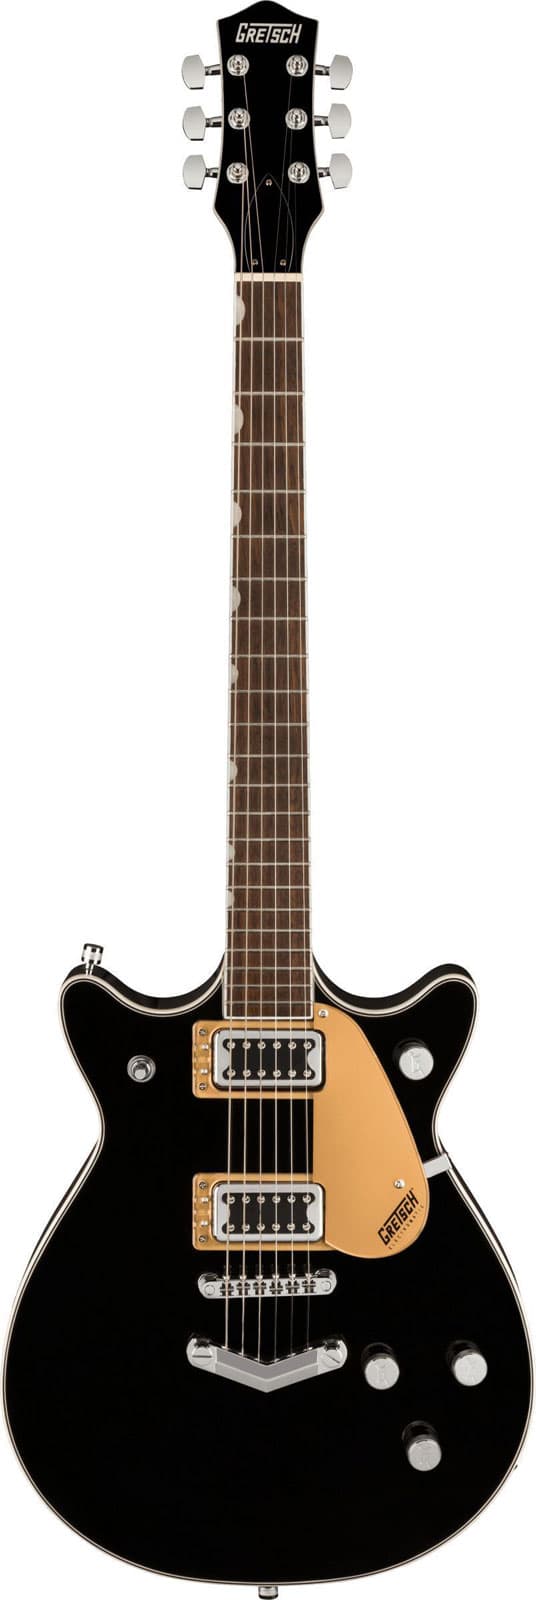 GRETSCH GUITARS G5222 ELECTROMATIC DOUBLE JET BT WITH V-STOPTAIL IL BLACK